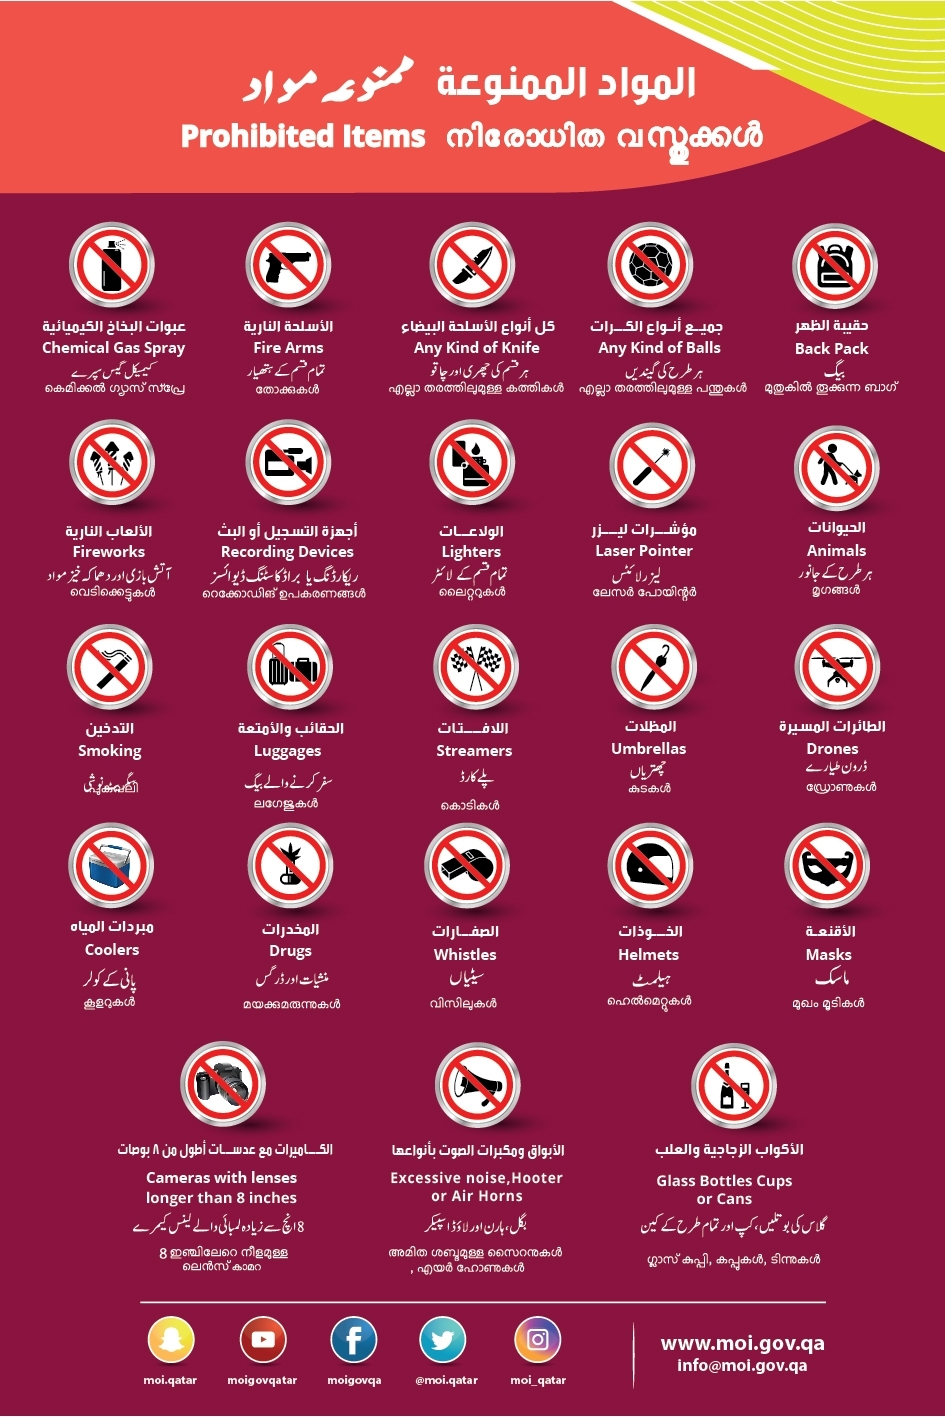 Arabian Gulf Cup 2019 Prohibited Things to Carry